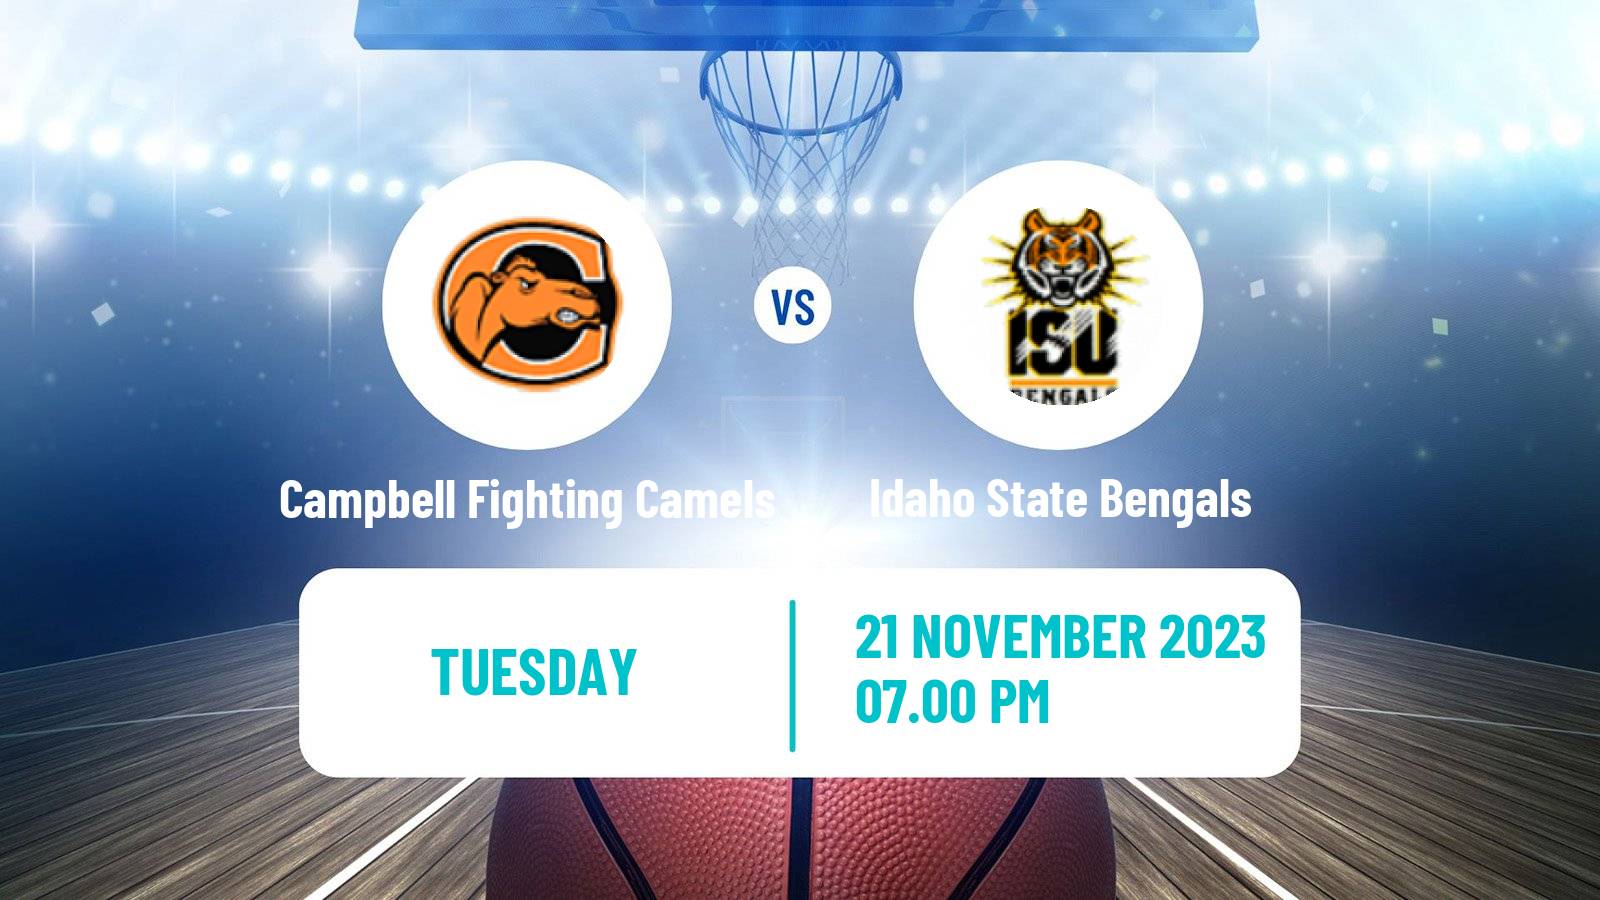 Basketball NCAA College Basketball Campbell Fighting Camels - Idaho State Bengals